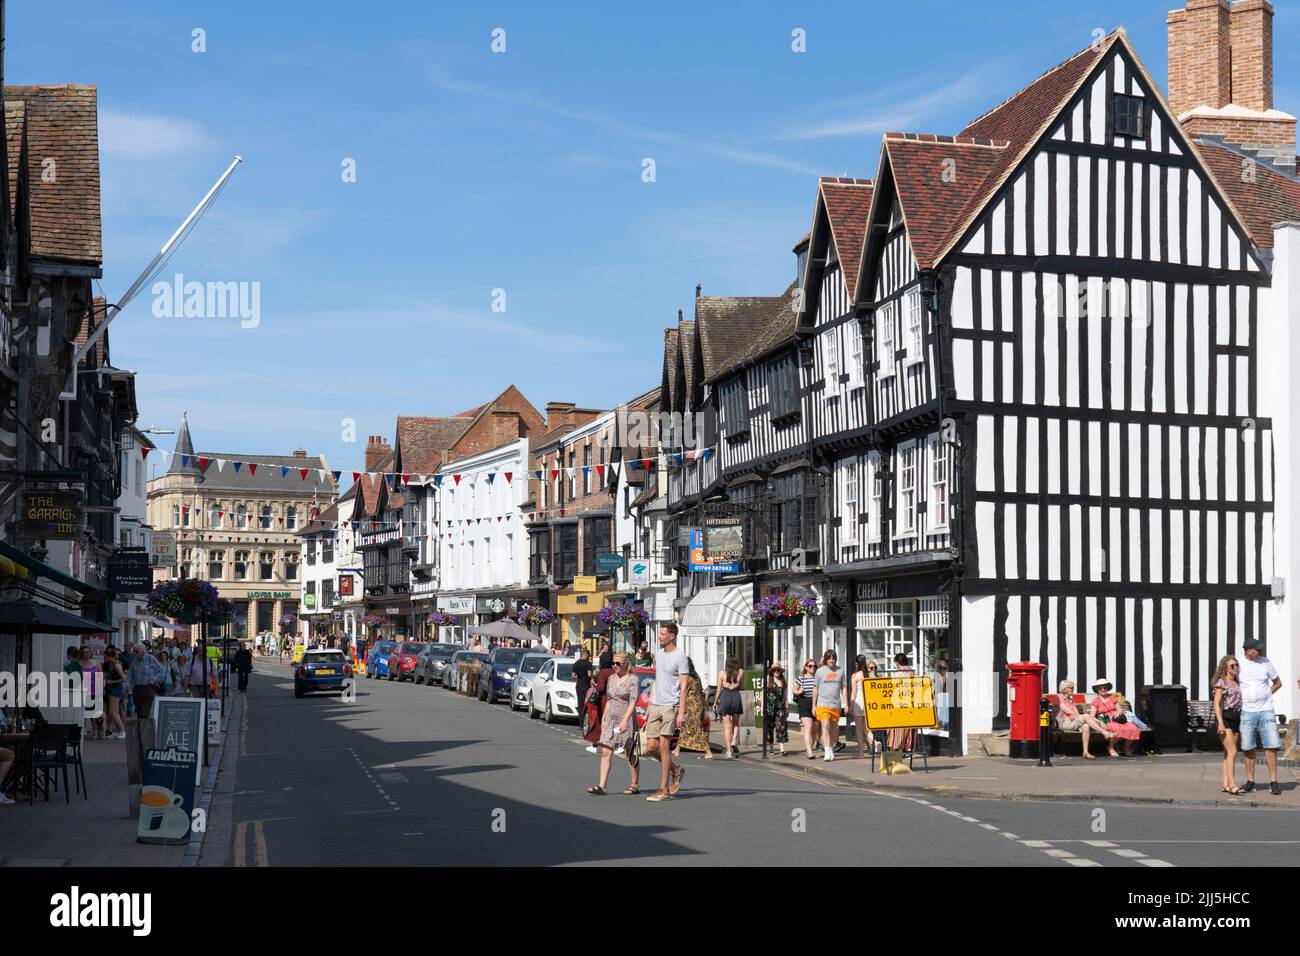 Shoppers and visitors to Stratford upon Avon on the High Street in July, with historic timber framed and plaster infill walled buildings. England Stock Photo